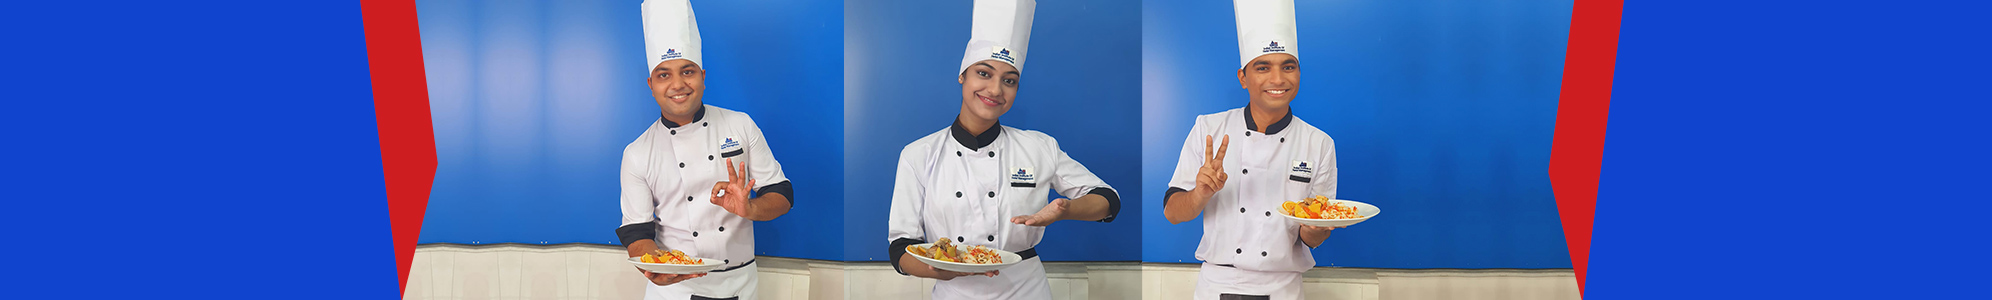 Hotel Management Courses in Kolkata - Admission Open